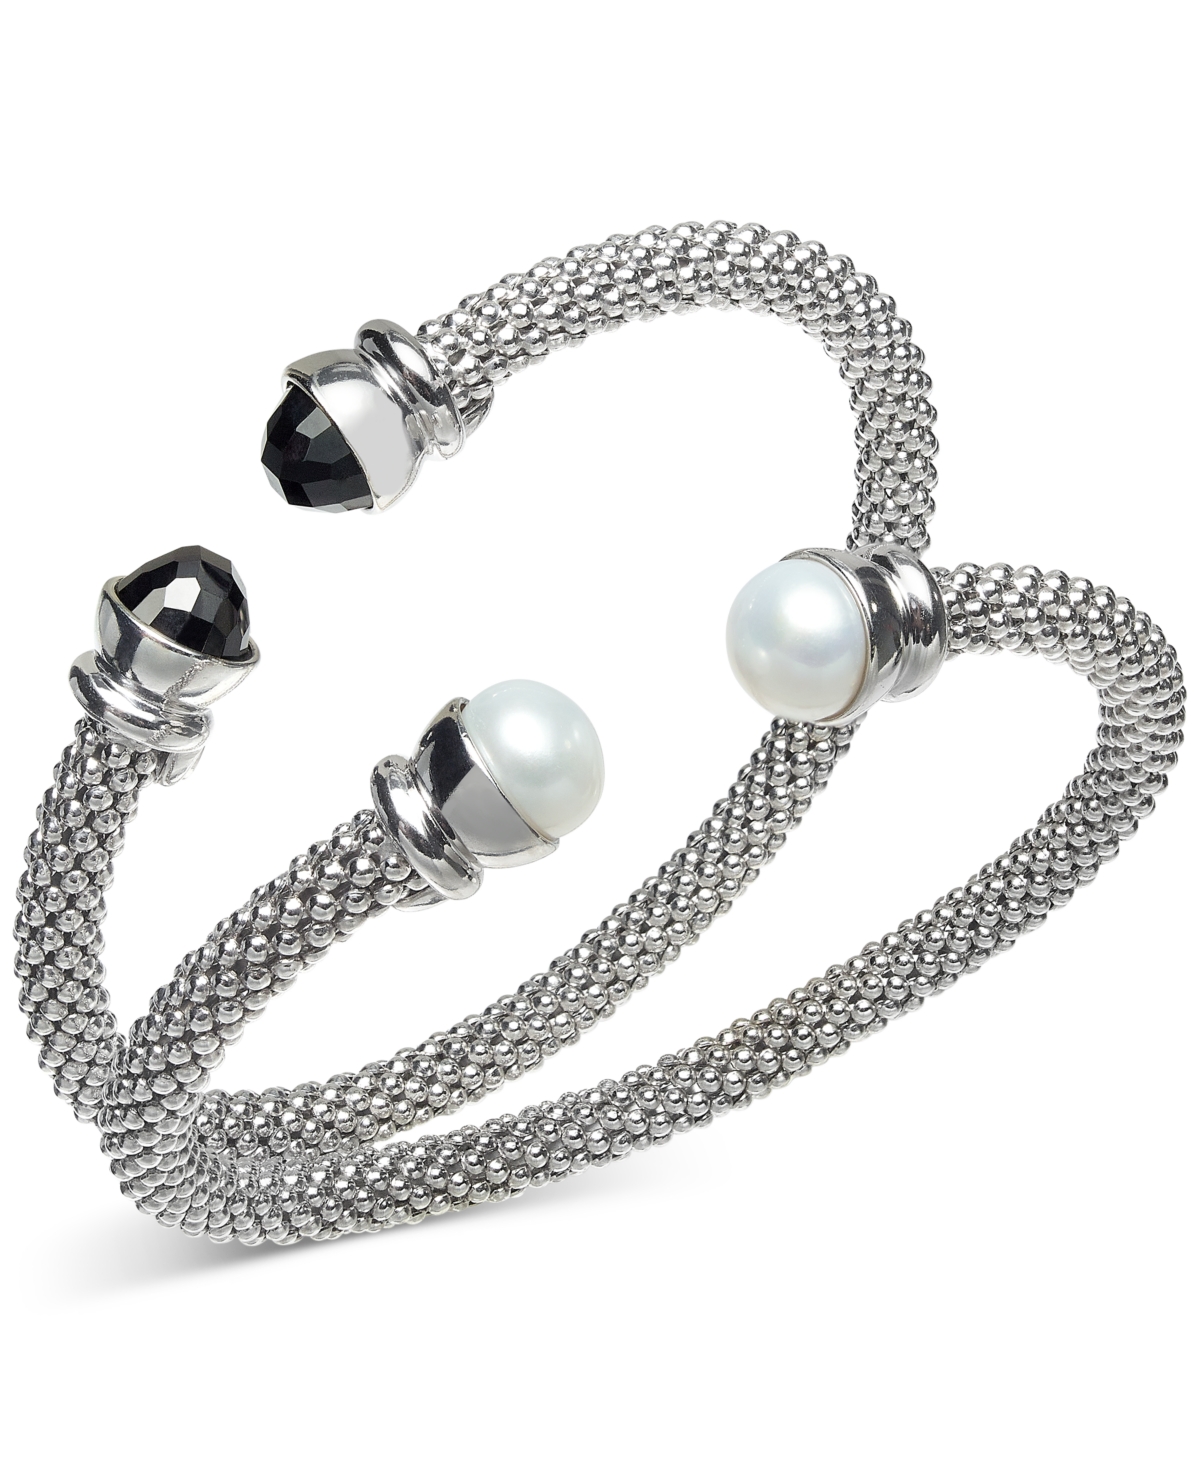 2-Pc. Set Cultured Freshwater Pearl (8 1/4 - 8 1/2mm) & Onyx Popcorn Cuff Bangle Bracelets in Sterling Silver - Sterling Silver